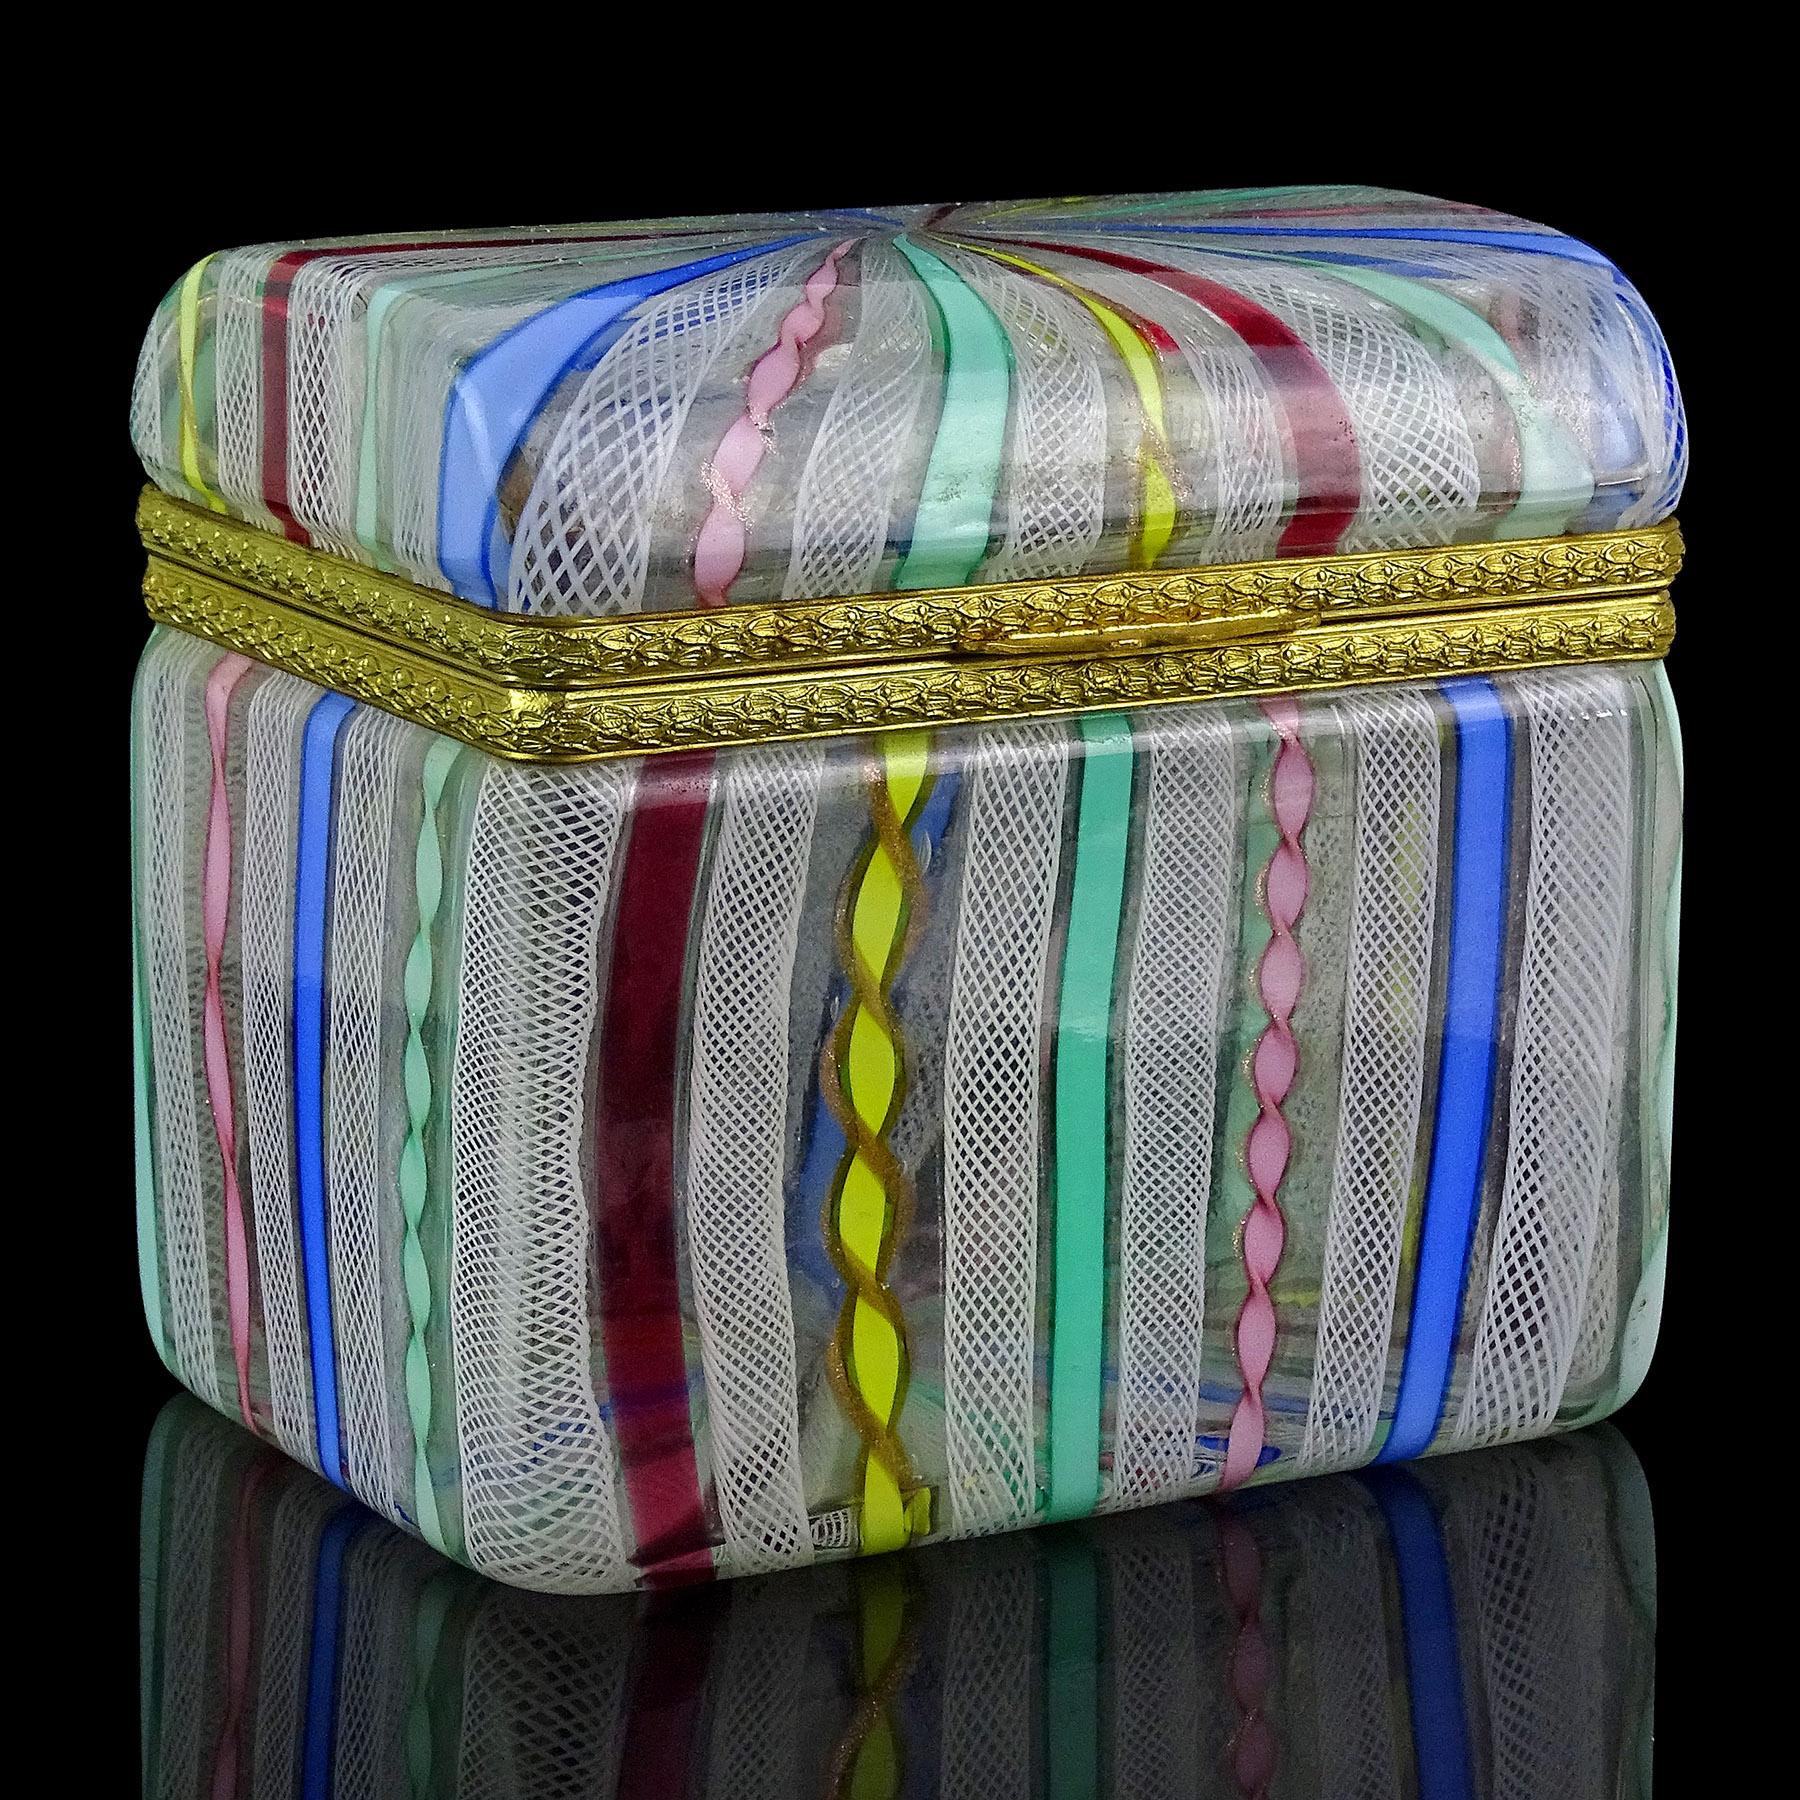 Gorgeous vintage Murano hand blown multi-color twisting rainbow ribbons Italian art glass casket jewelry box. Documented to the Fratelli Toso company. There are pink, yellow, teal green, blue and white colors. The piece has a treasure chest / trunk